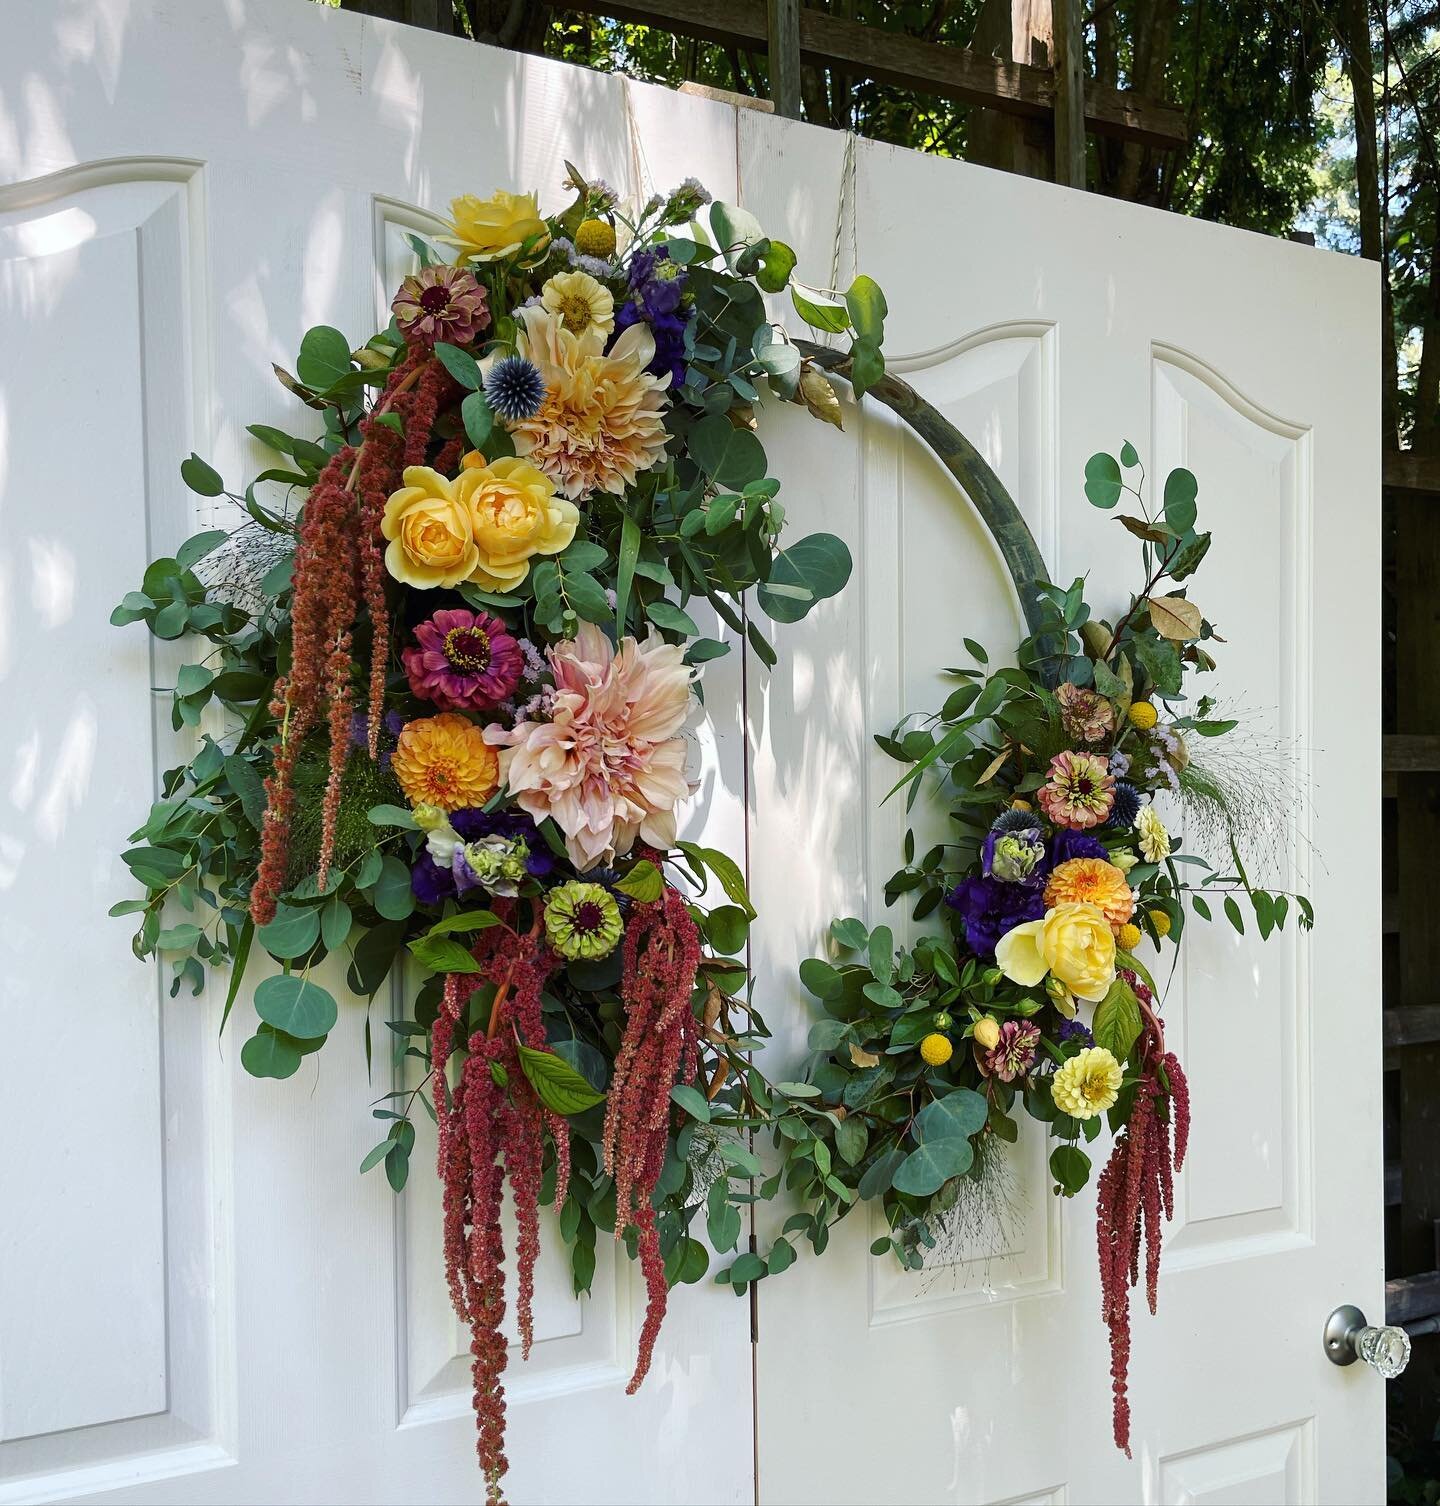 This weekend I did floral for a sweet little wedding in Kenwood. The bride&rsquo;s vision was rustic, homemade and wildflowers in every color to decorate the backyard of the church in Kenwood for the ceremony and the reception in a woodsy knoll at a 